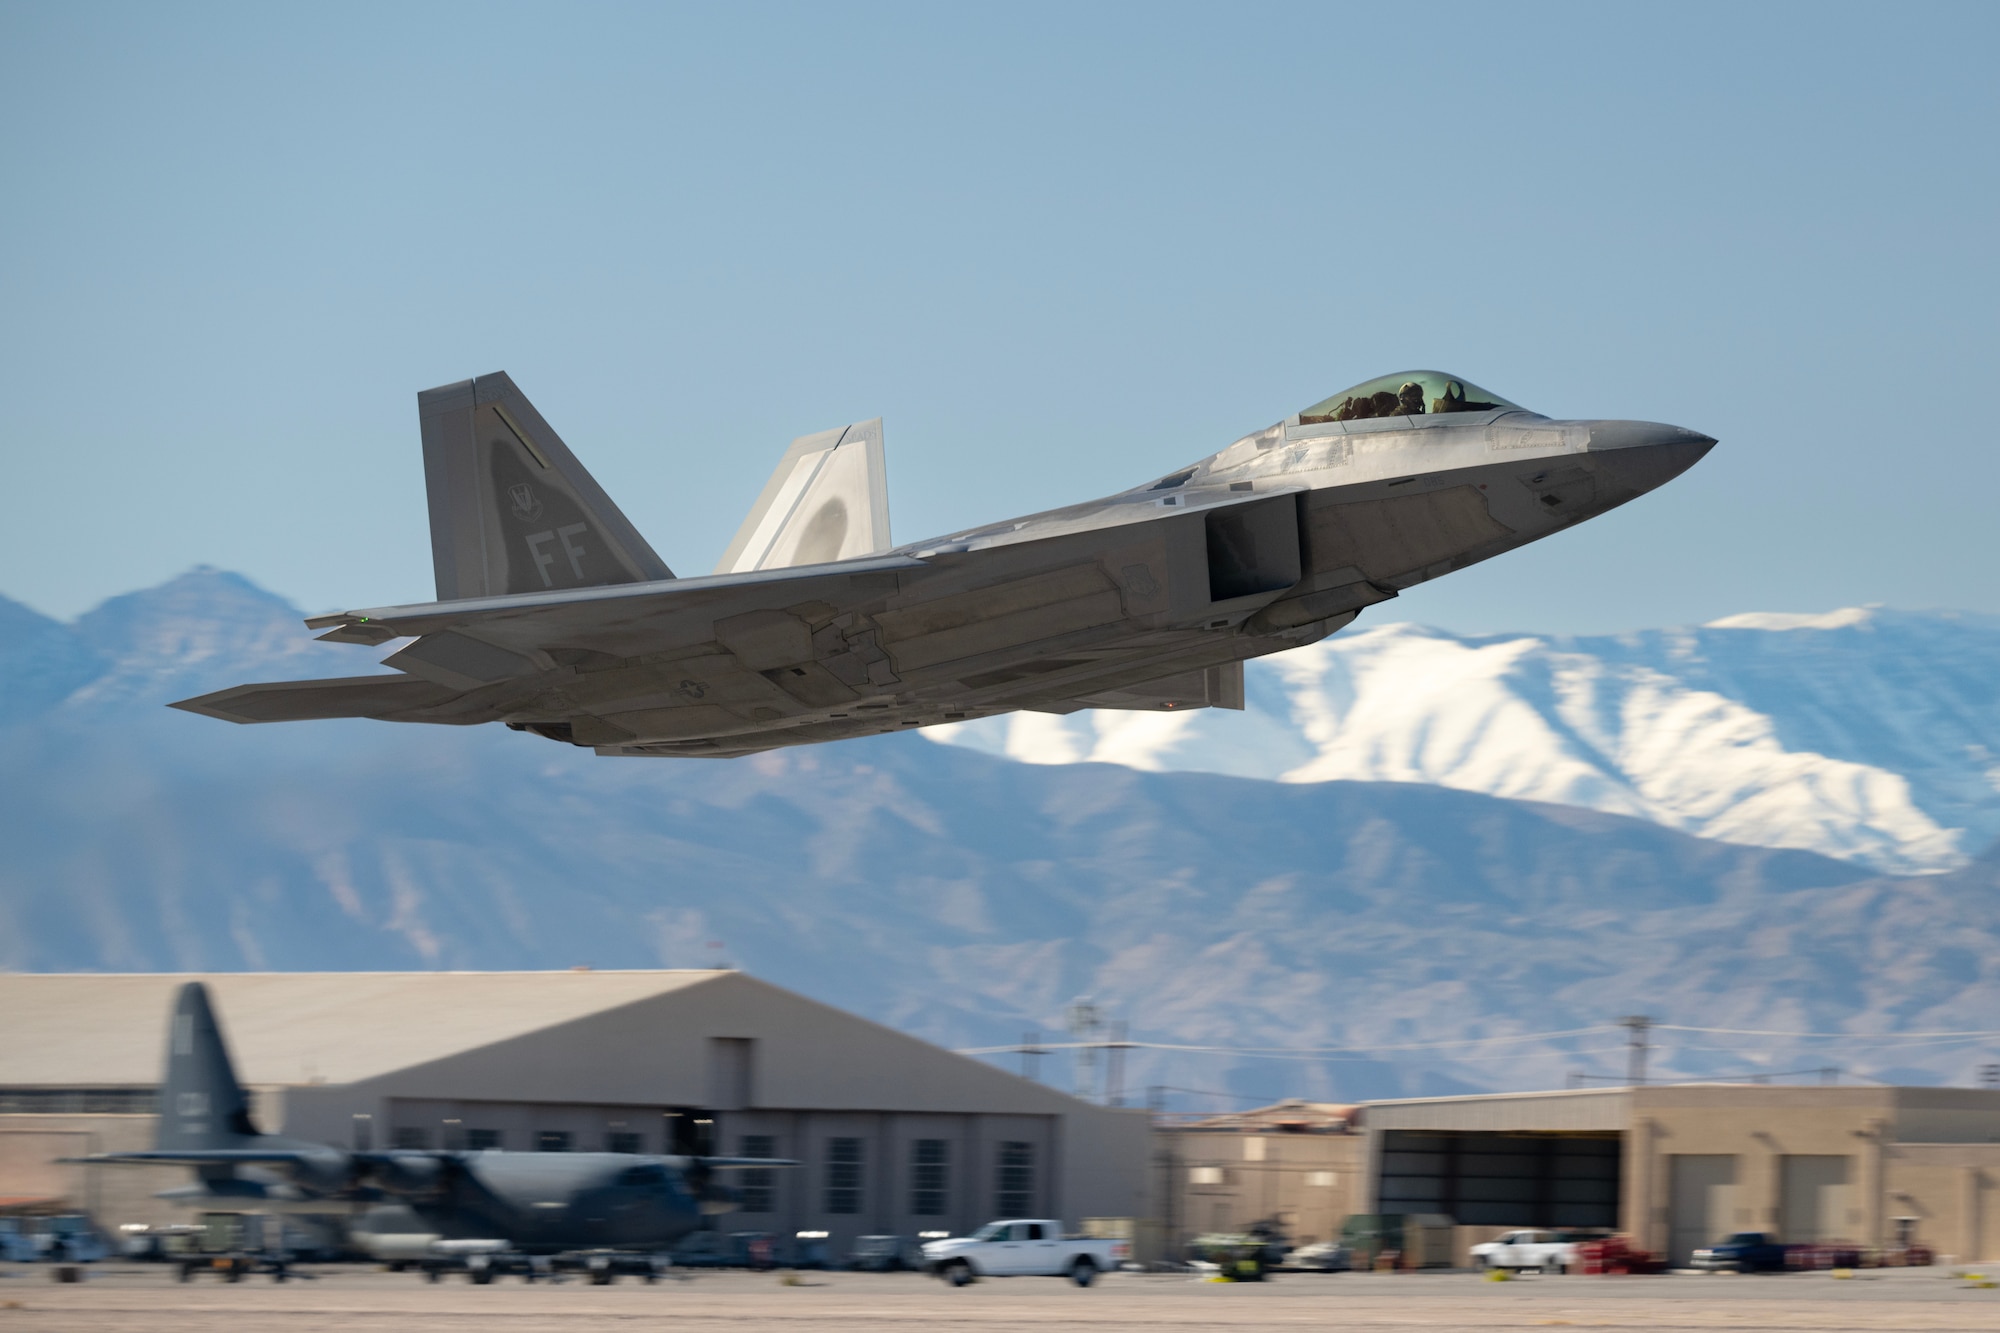 An F-22 Raptor assigned to the 94th Fighter Squadron, Joint Base Langley-Eustis, Virginia, takes off prior to the start of Red Flag 23-1 at Nellis Air Force Base, Nevada, Jan. 24, 2023. The 414th Combat Training Squadron conducts Red Flag exercises to provide aircrews the experience of multiple, intensive air combat sorties in the safety of a training environment. (U.S. Air Force photo by William R. Lewis)